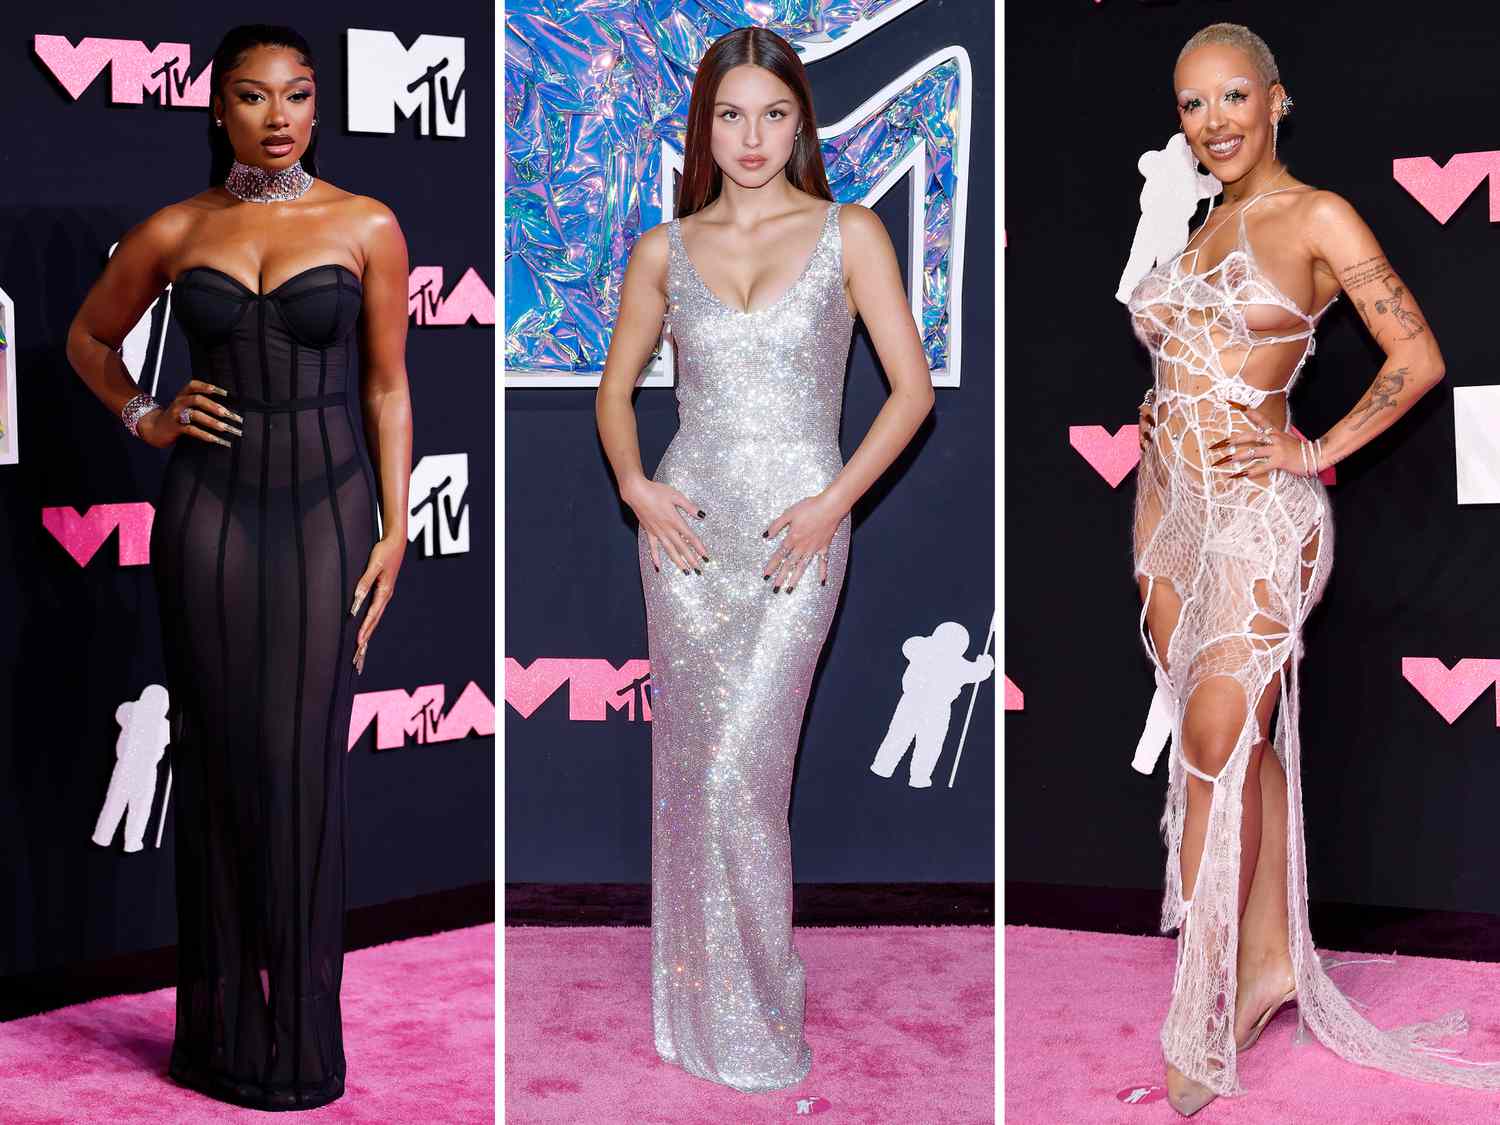 mtv-vmas-showcase-the-stars-a-night-of-music-and-glamour